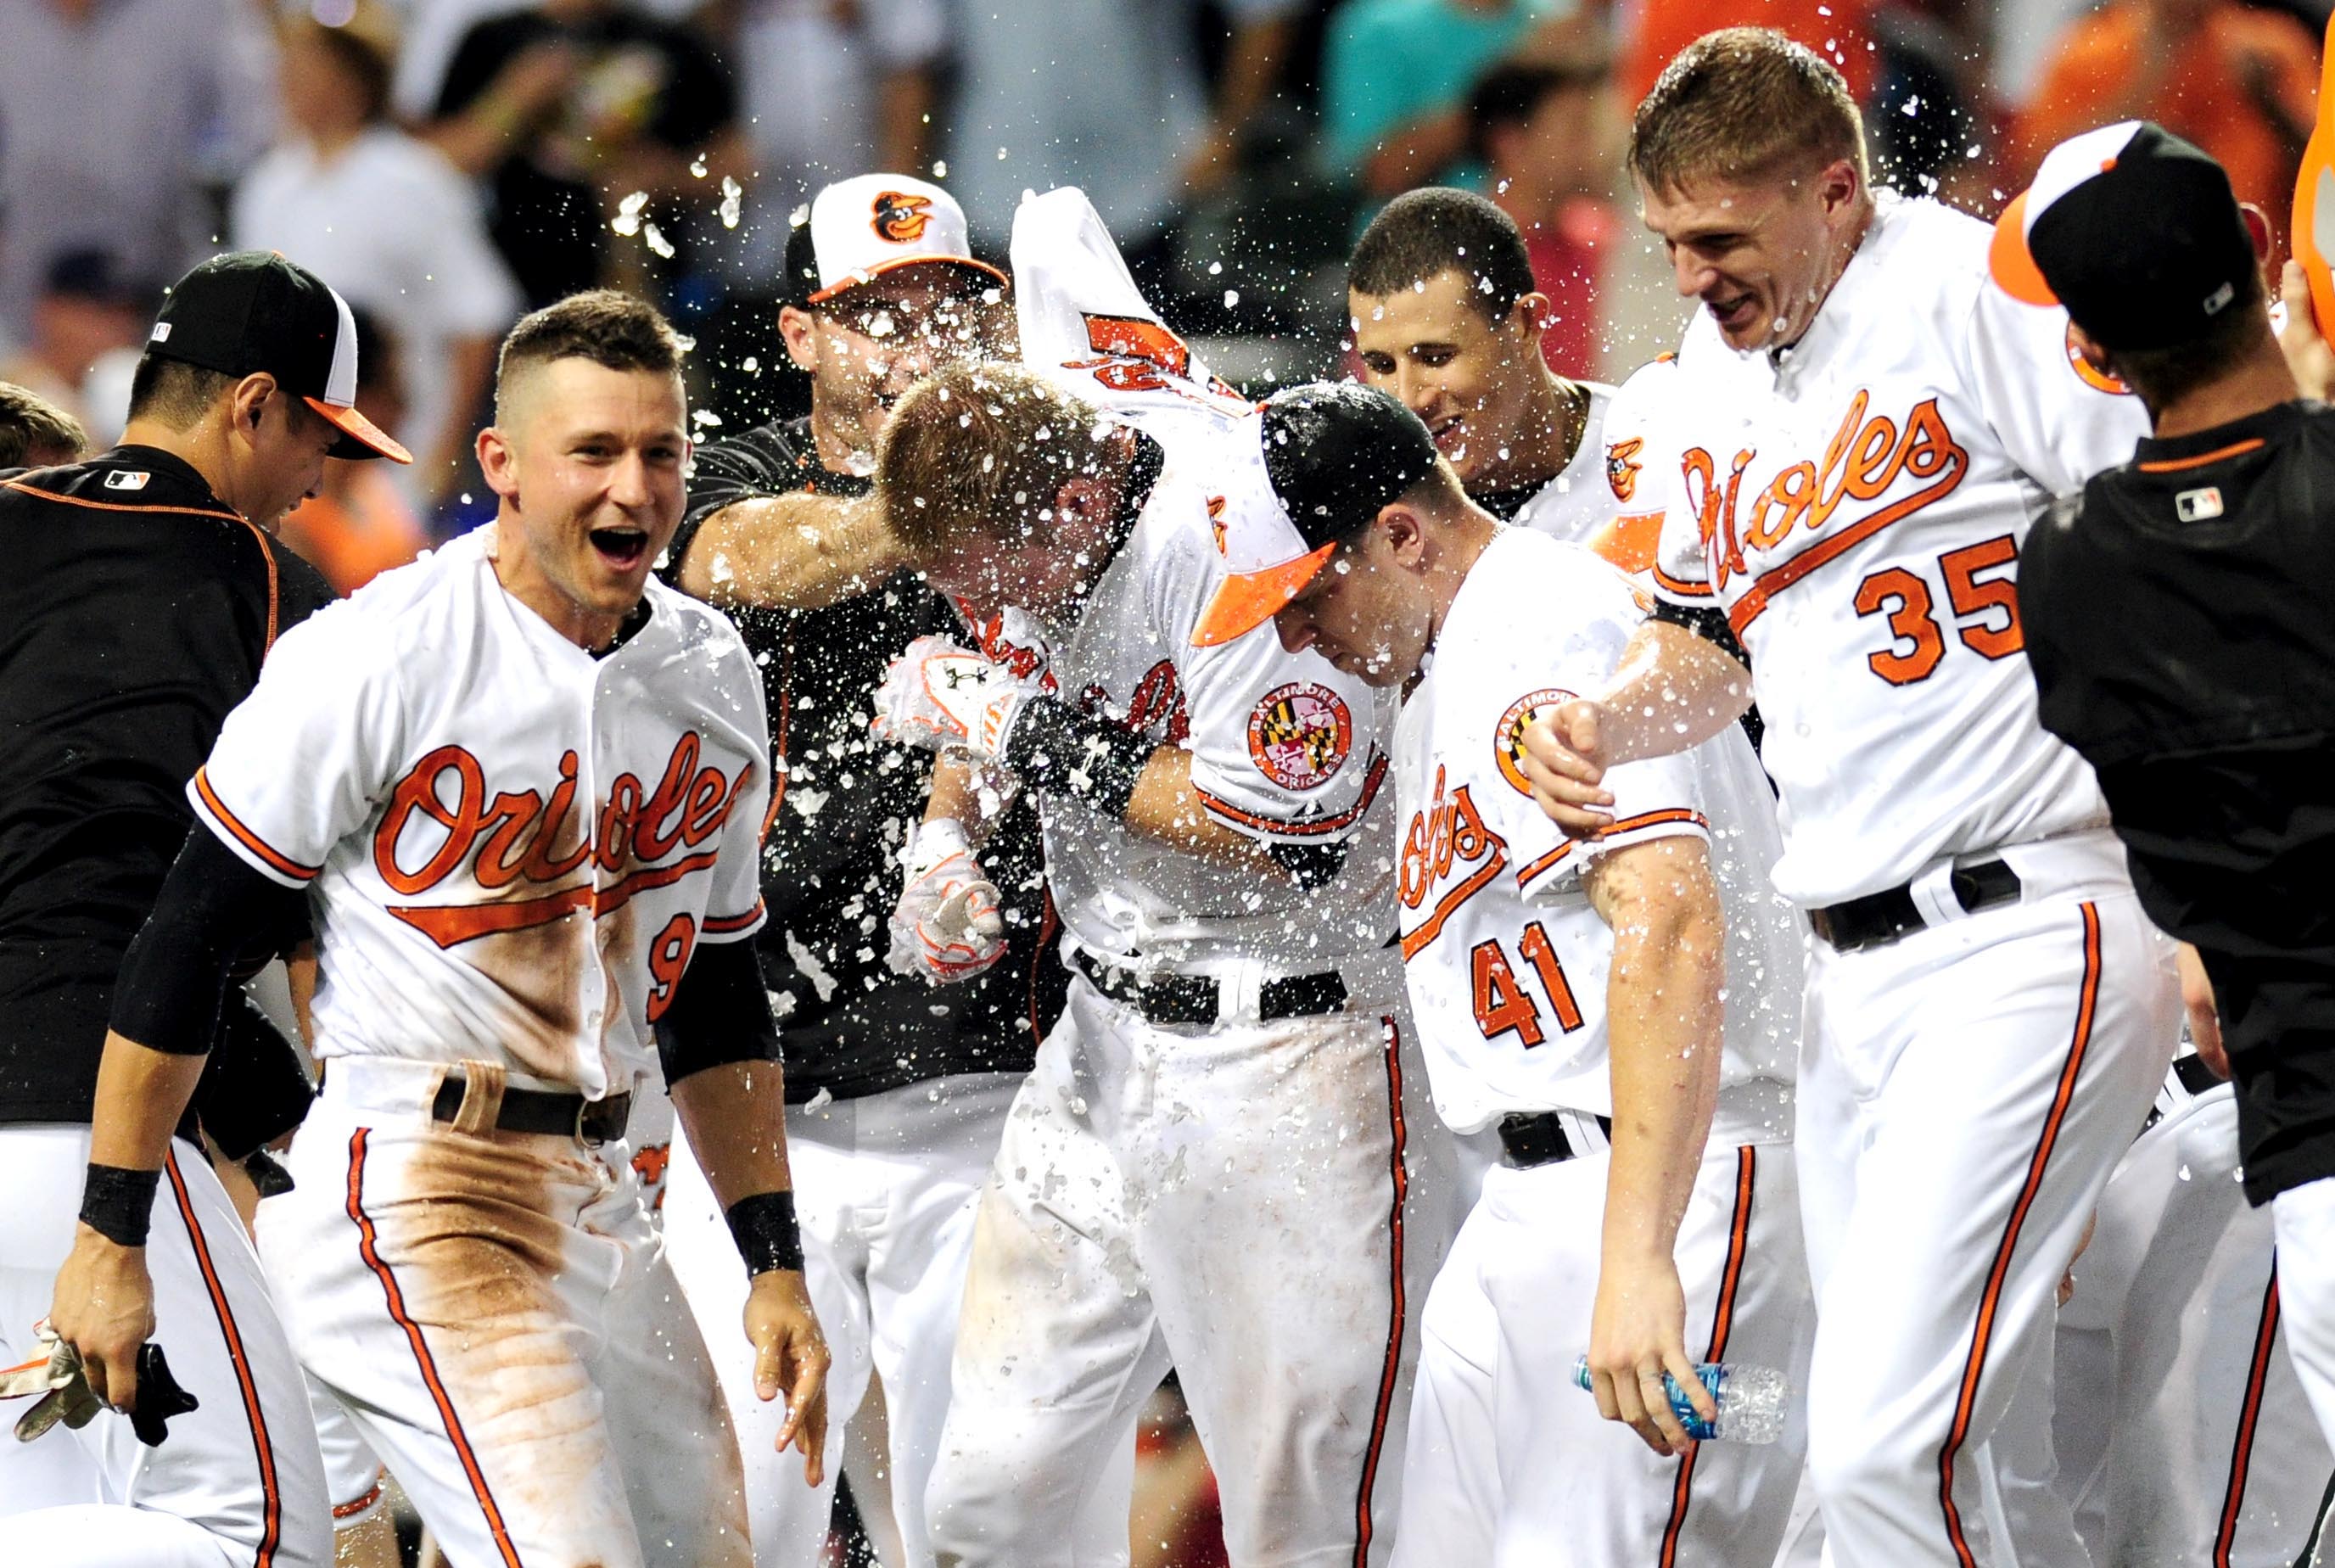 Wieters' 11th-inning HR gives Orioles 2-1 win over Braves